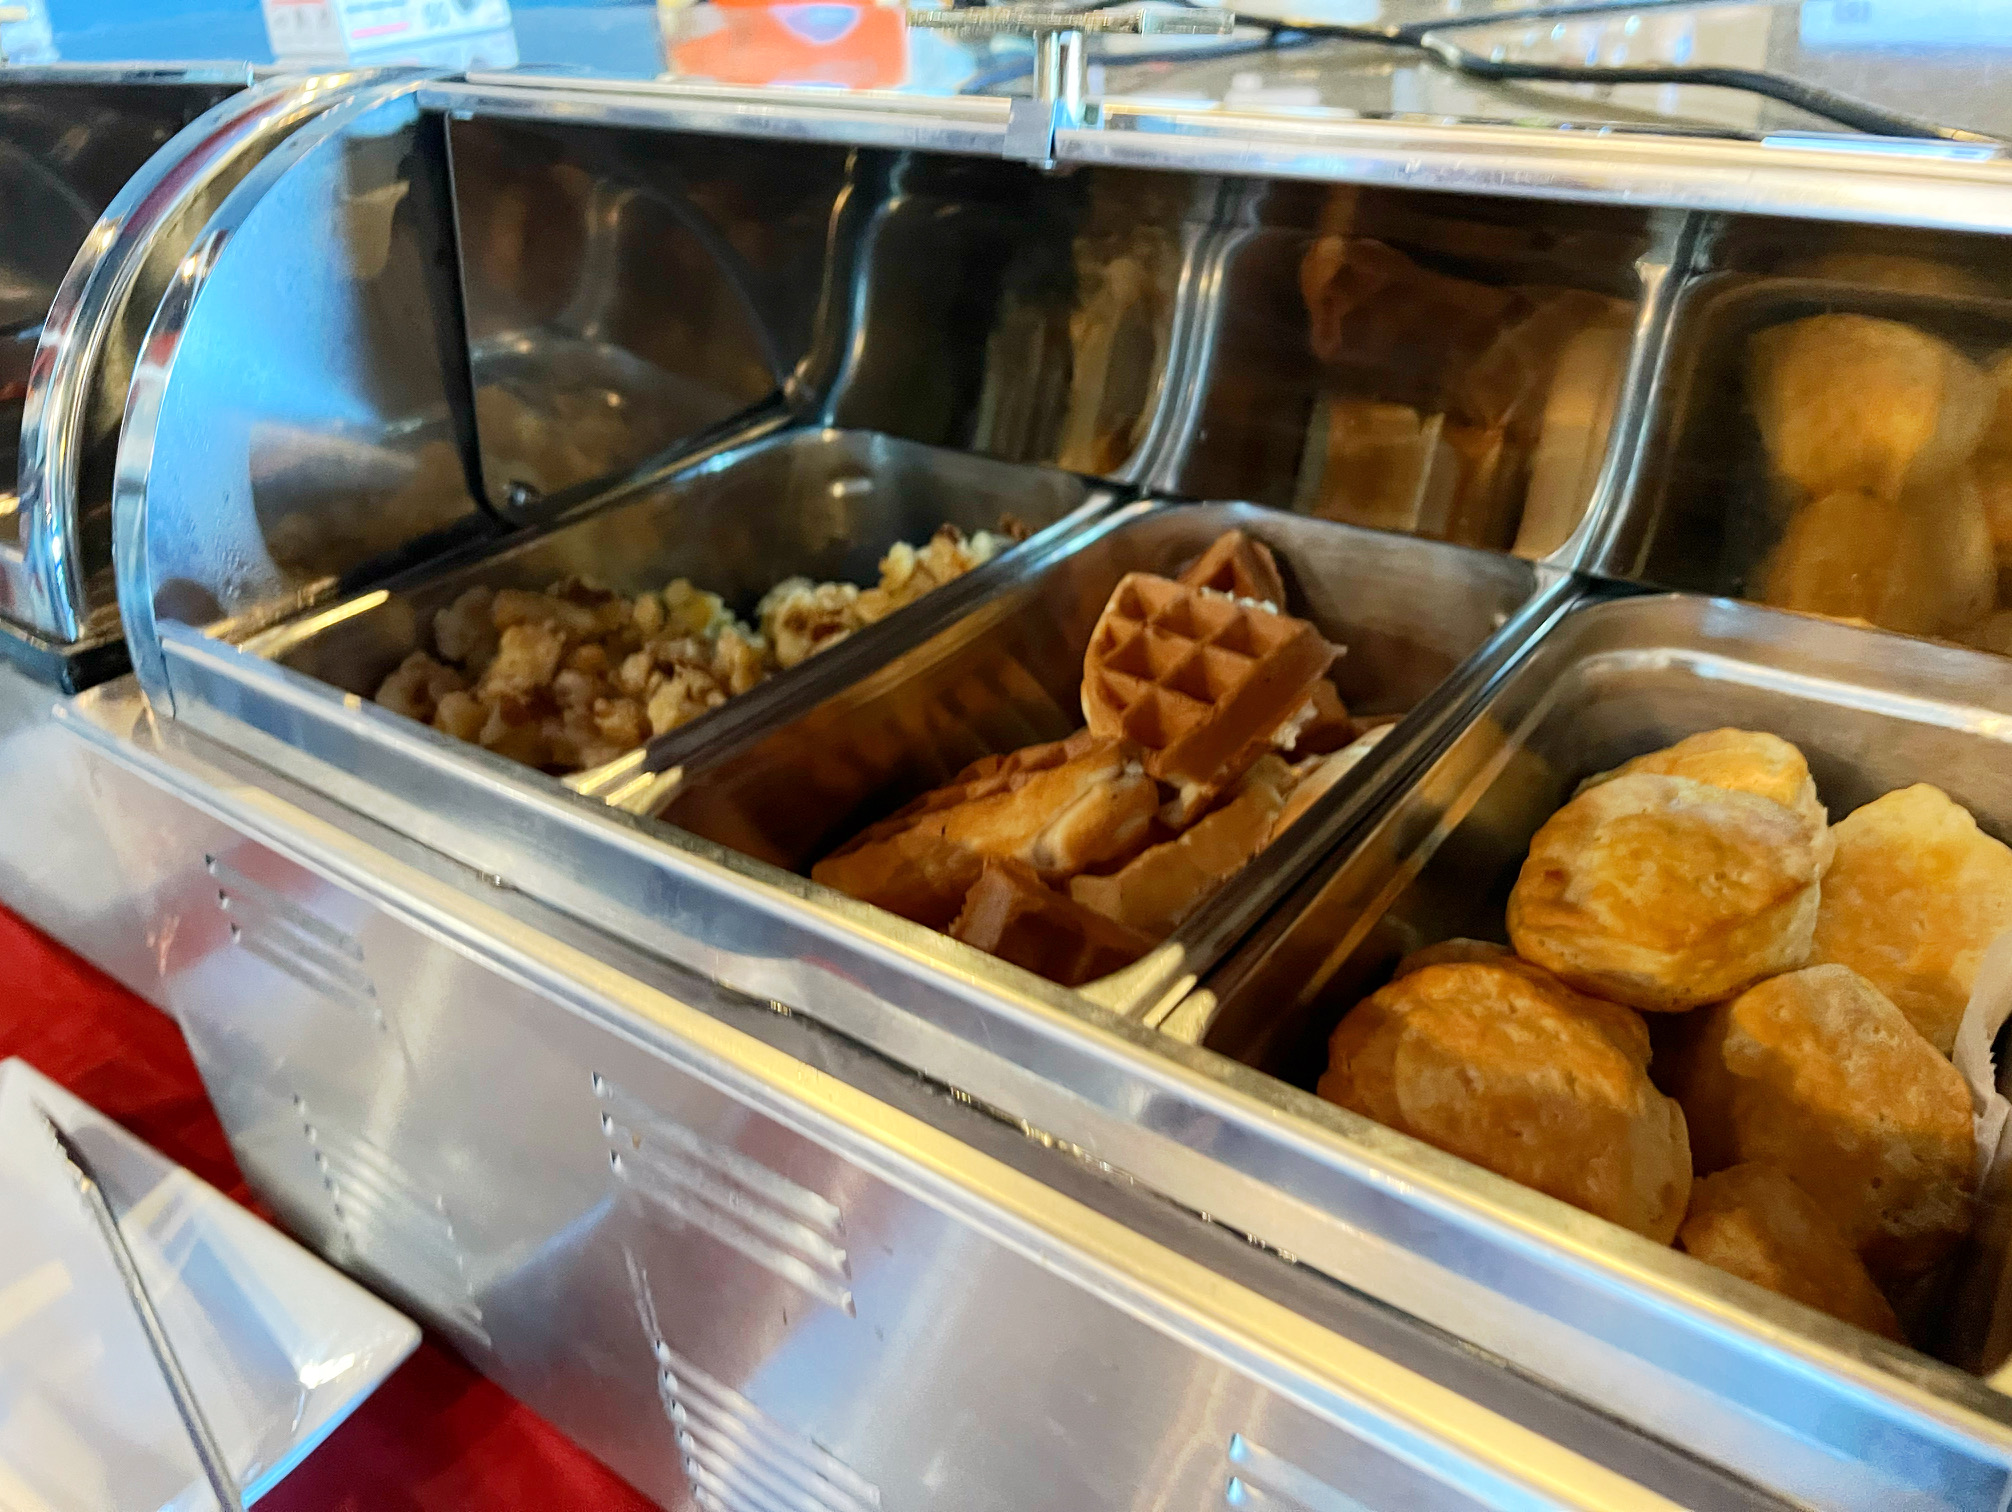 On the buffet, there is a silver metal container with three dividers holding breakfast potatoes, waffle triangles, and biscuits. Photo by Alyssa Buckley.